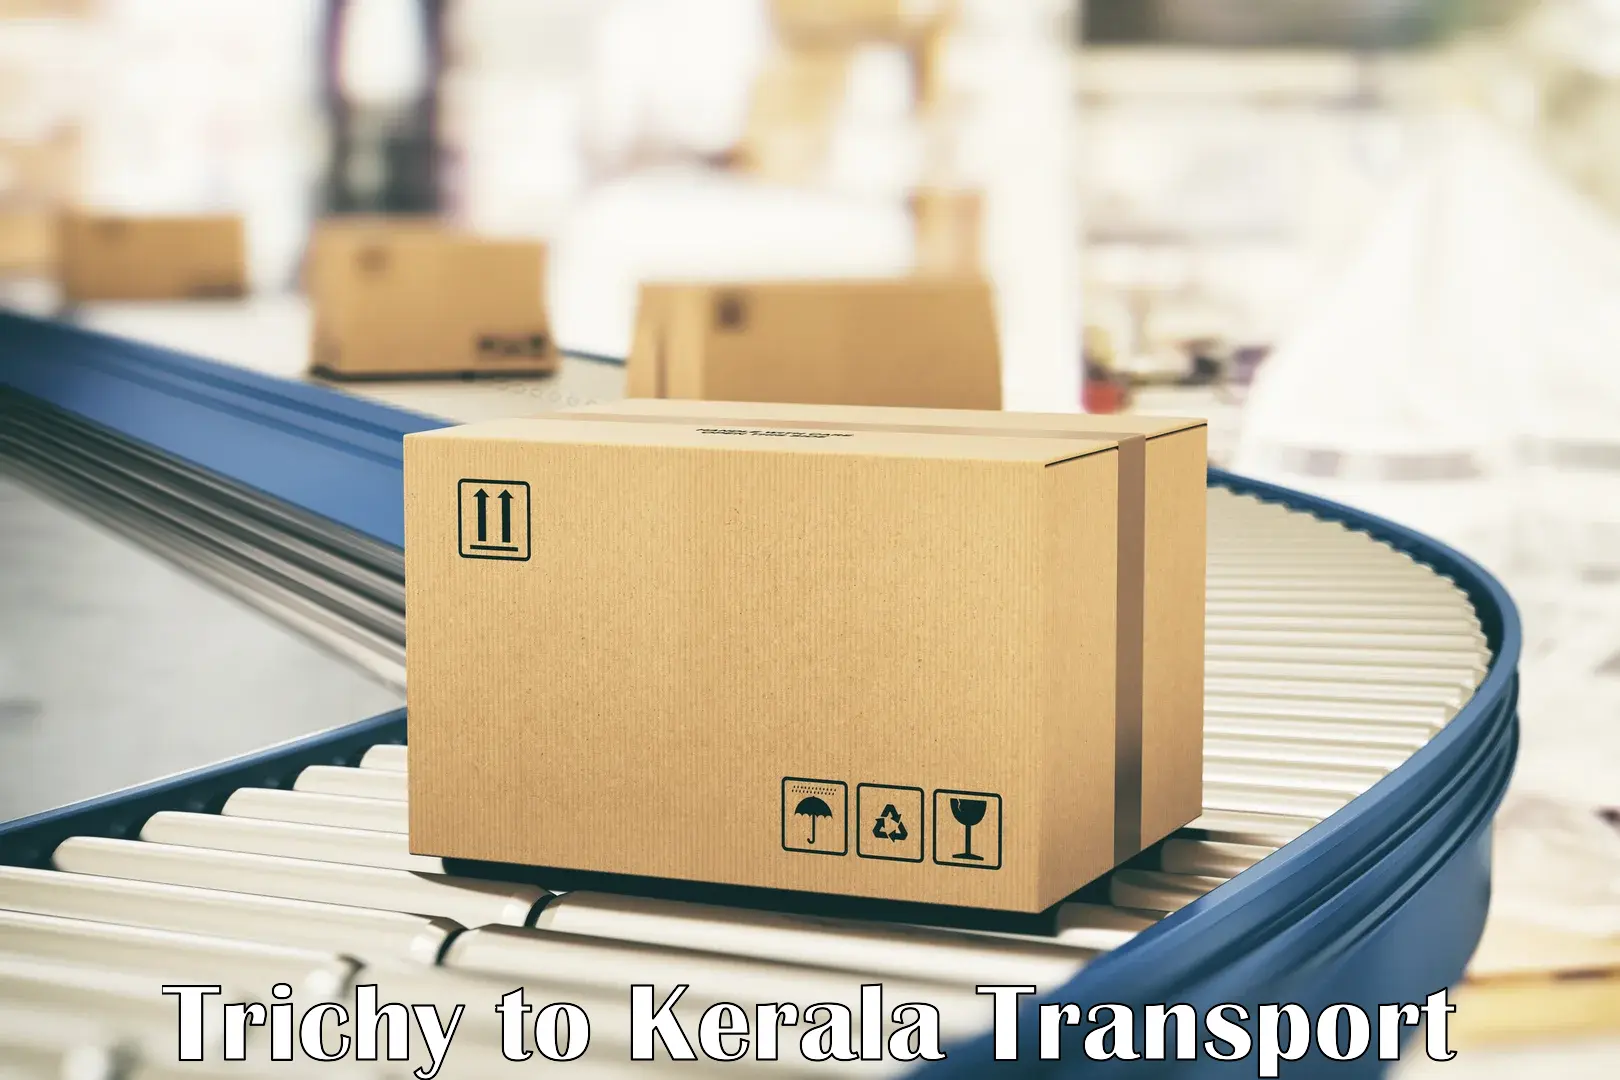 Road transport online services Trichy to Cochin University of Science and Technology